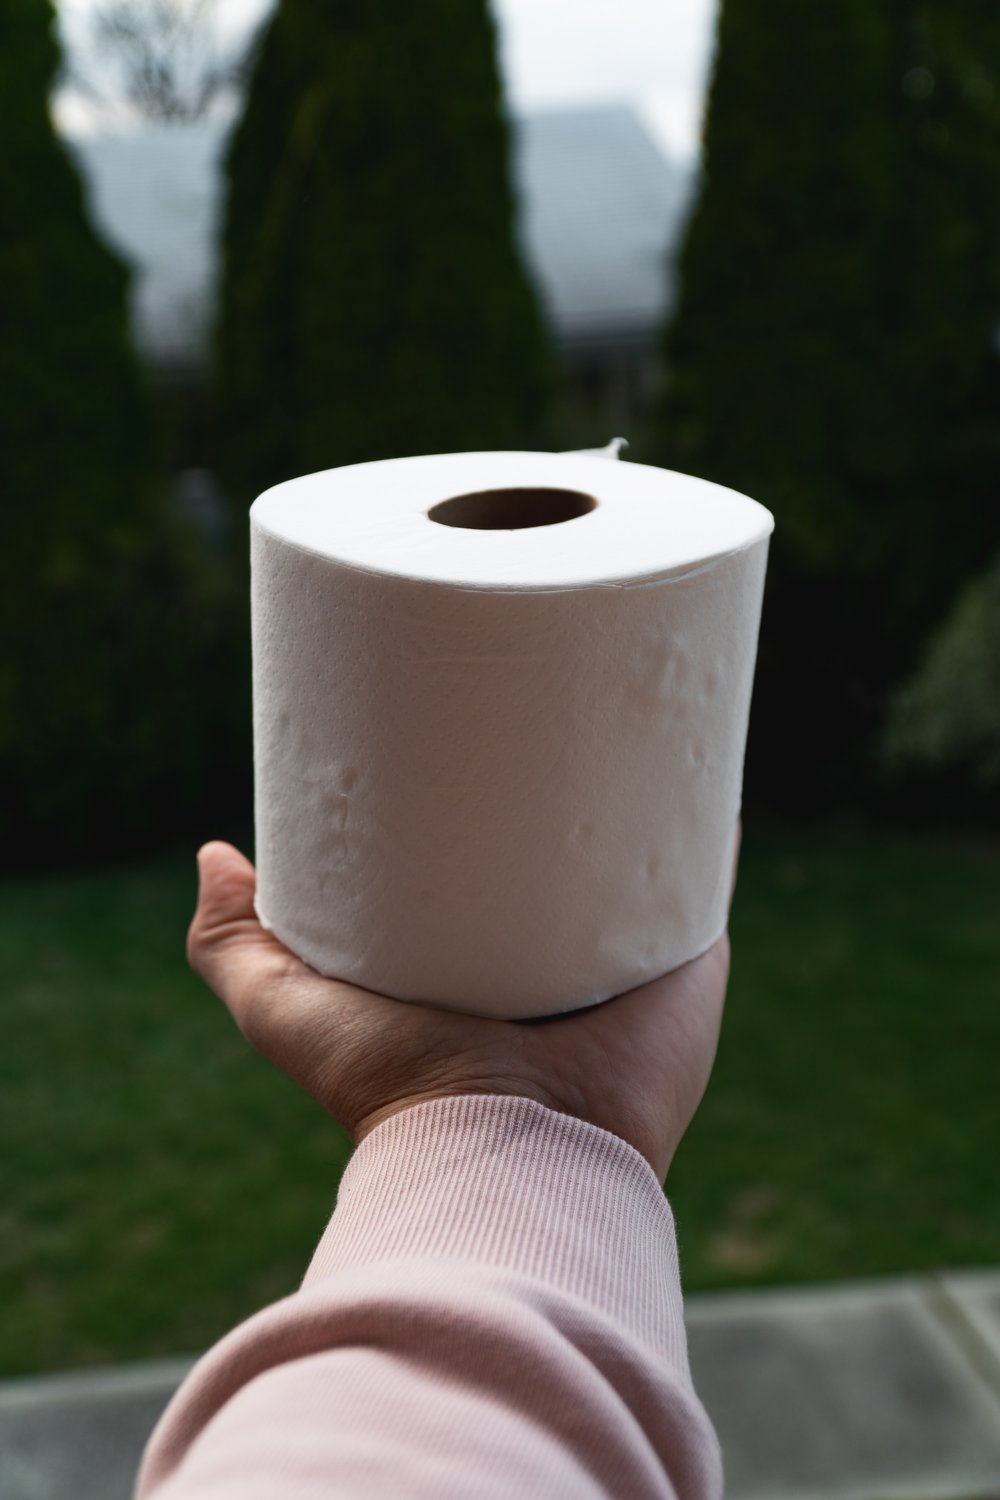 Perhaps the ultimate gift of 2020: a roll of toilet paper.